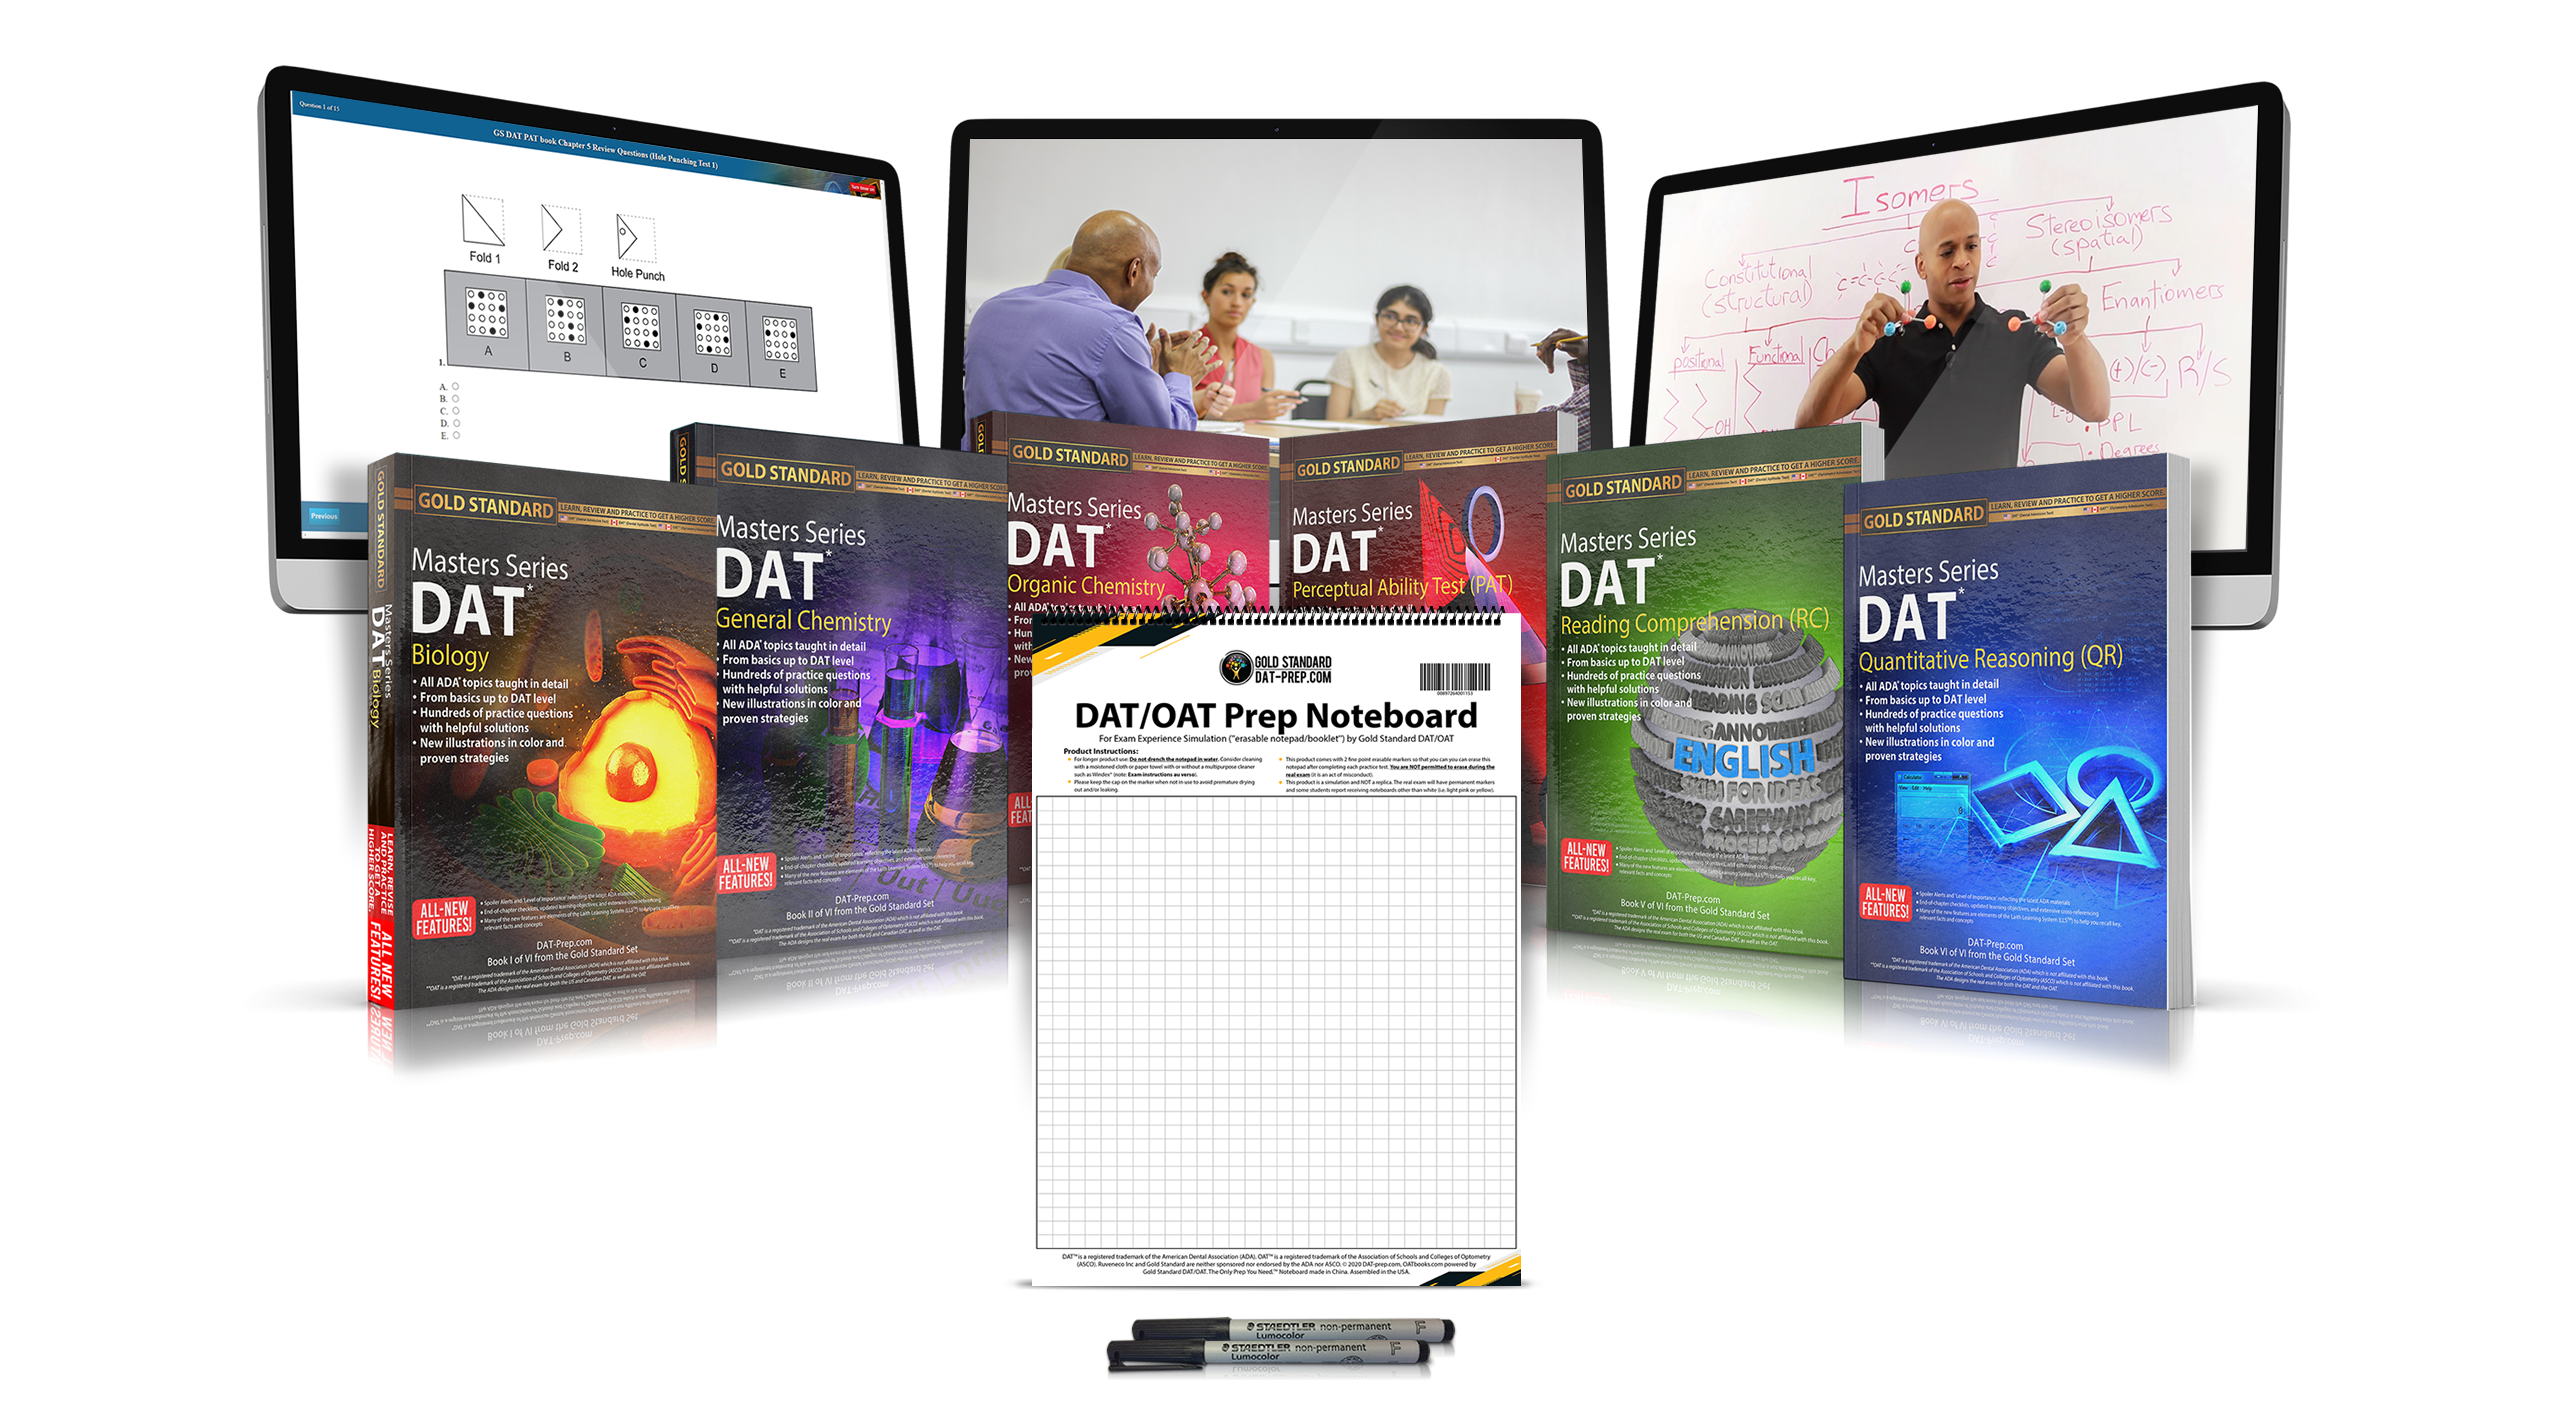 The Best DAT Prep: The Platinum Package